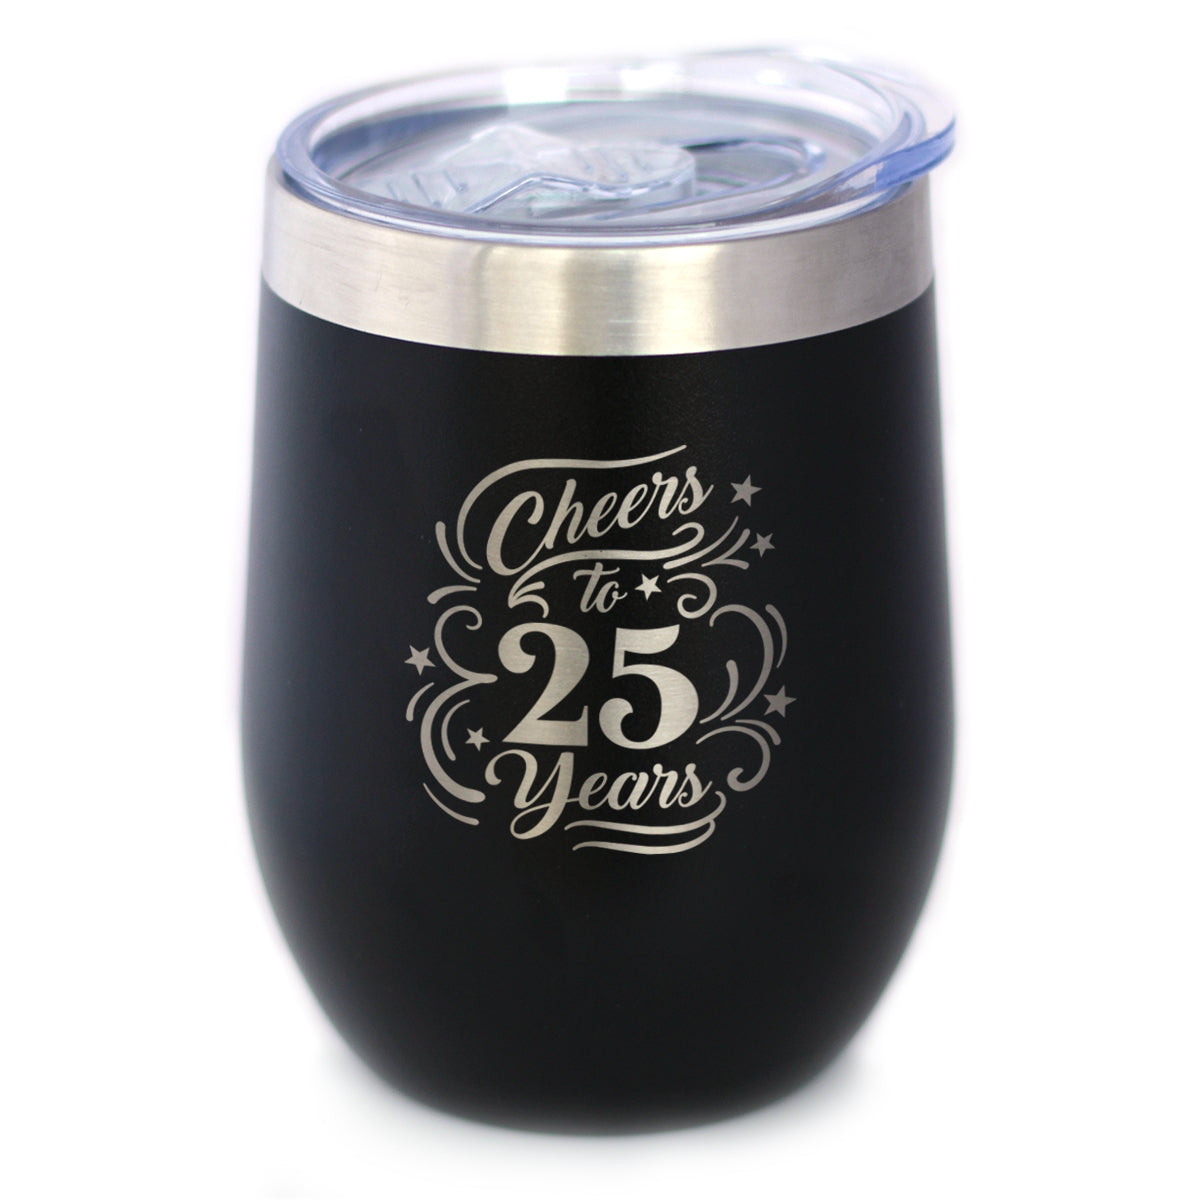 Cheers to 25 Years - Wine Tumbler Glass with Sliding Lid - Stainless Steel Insulated Mug - 25th Anniversary Gifts and Party Decor - Pink